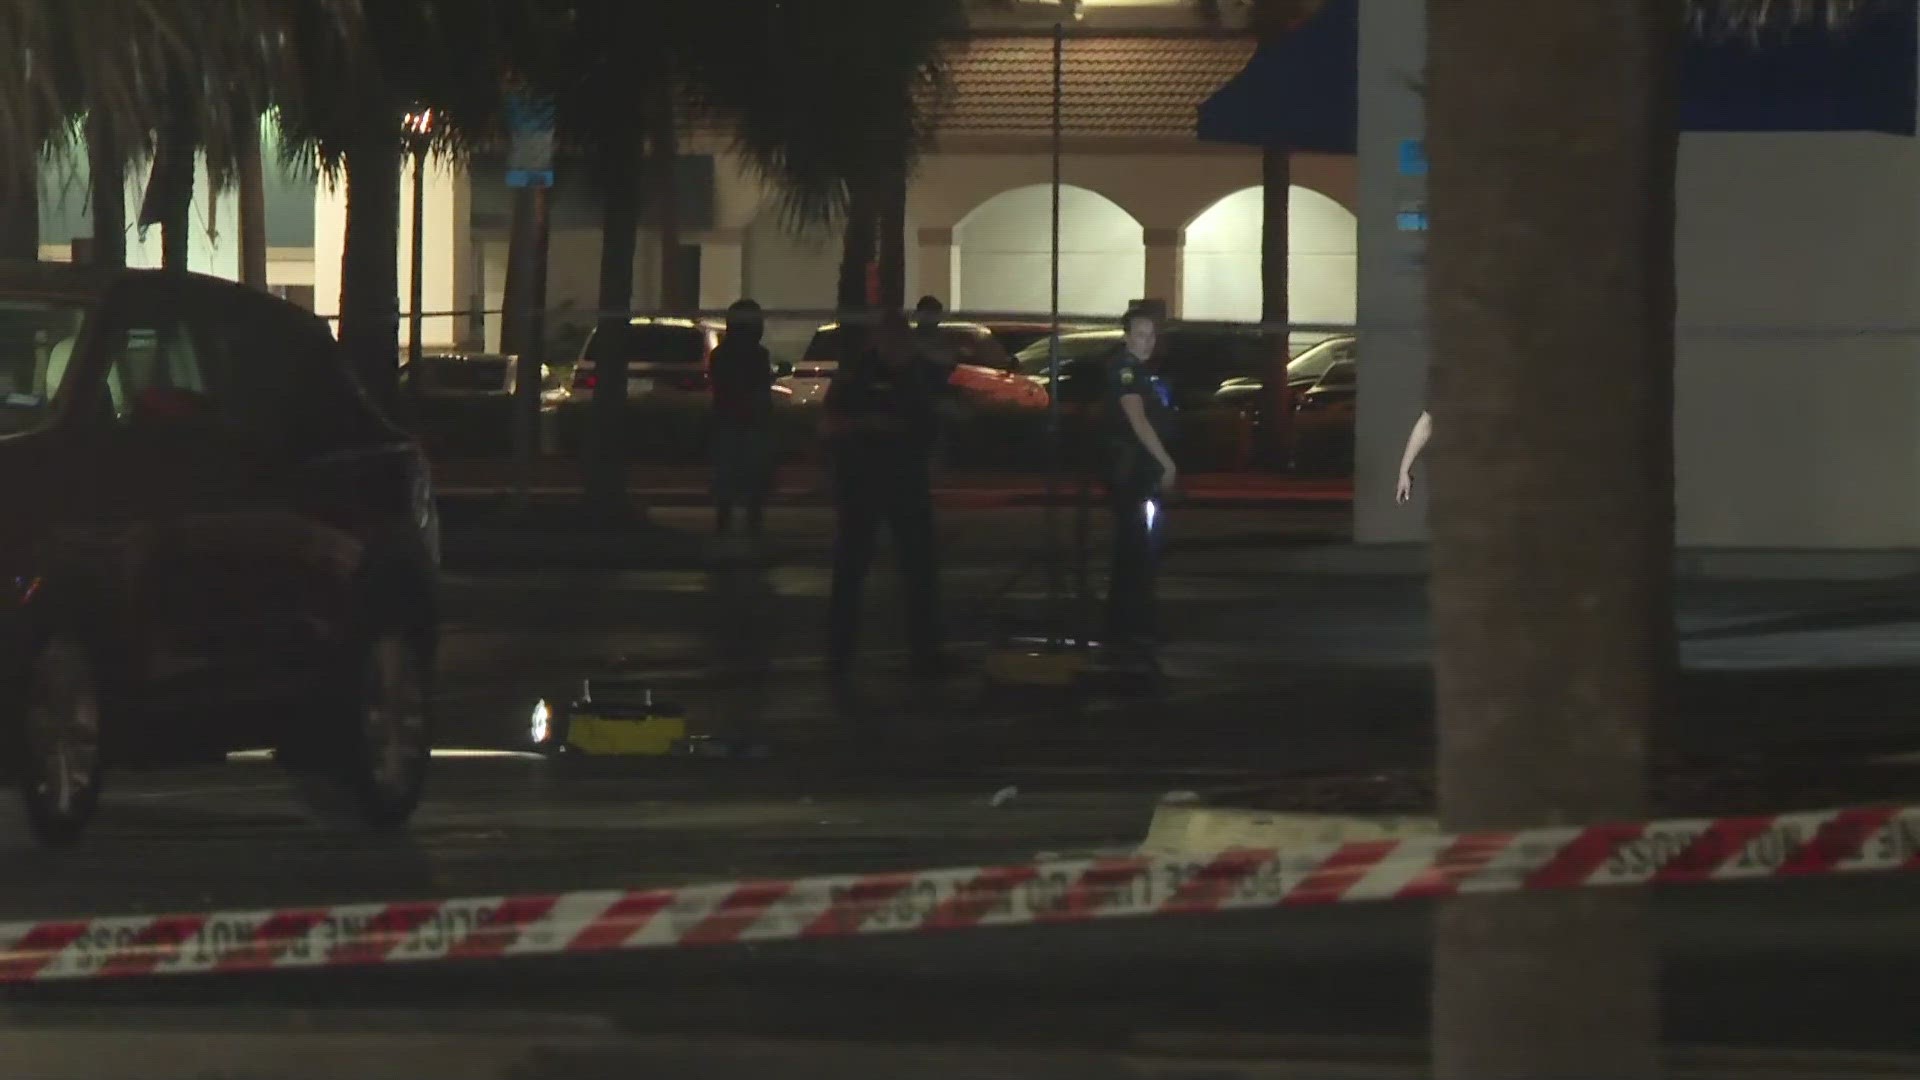 A person is dead after an active shooter was reported in Jacksonville Beach Sunday evening, police say. They are searching for suspects.